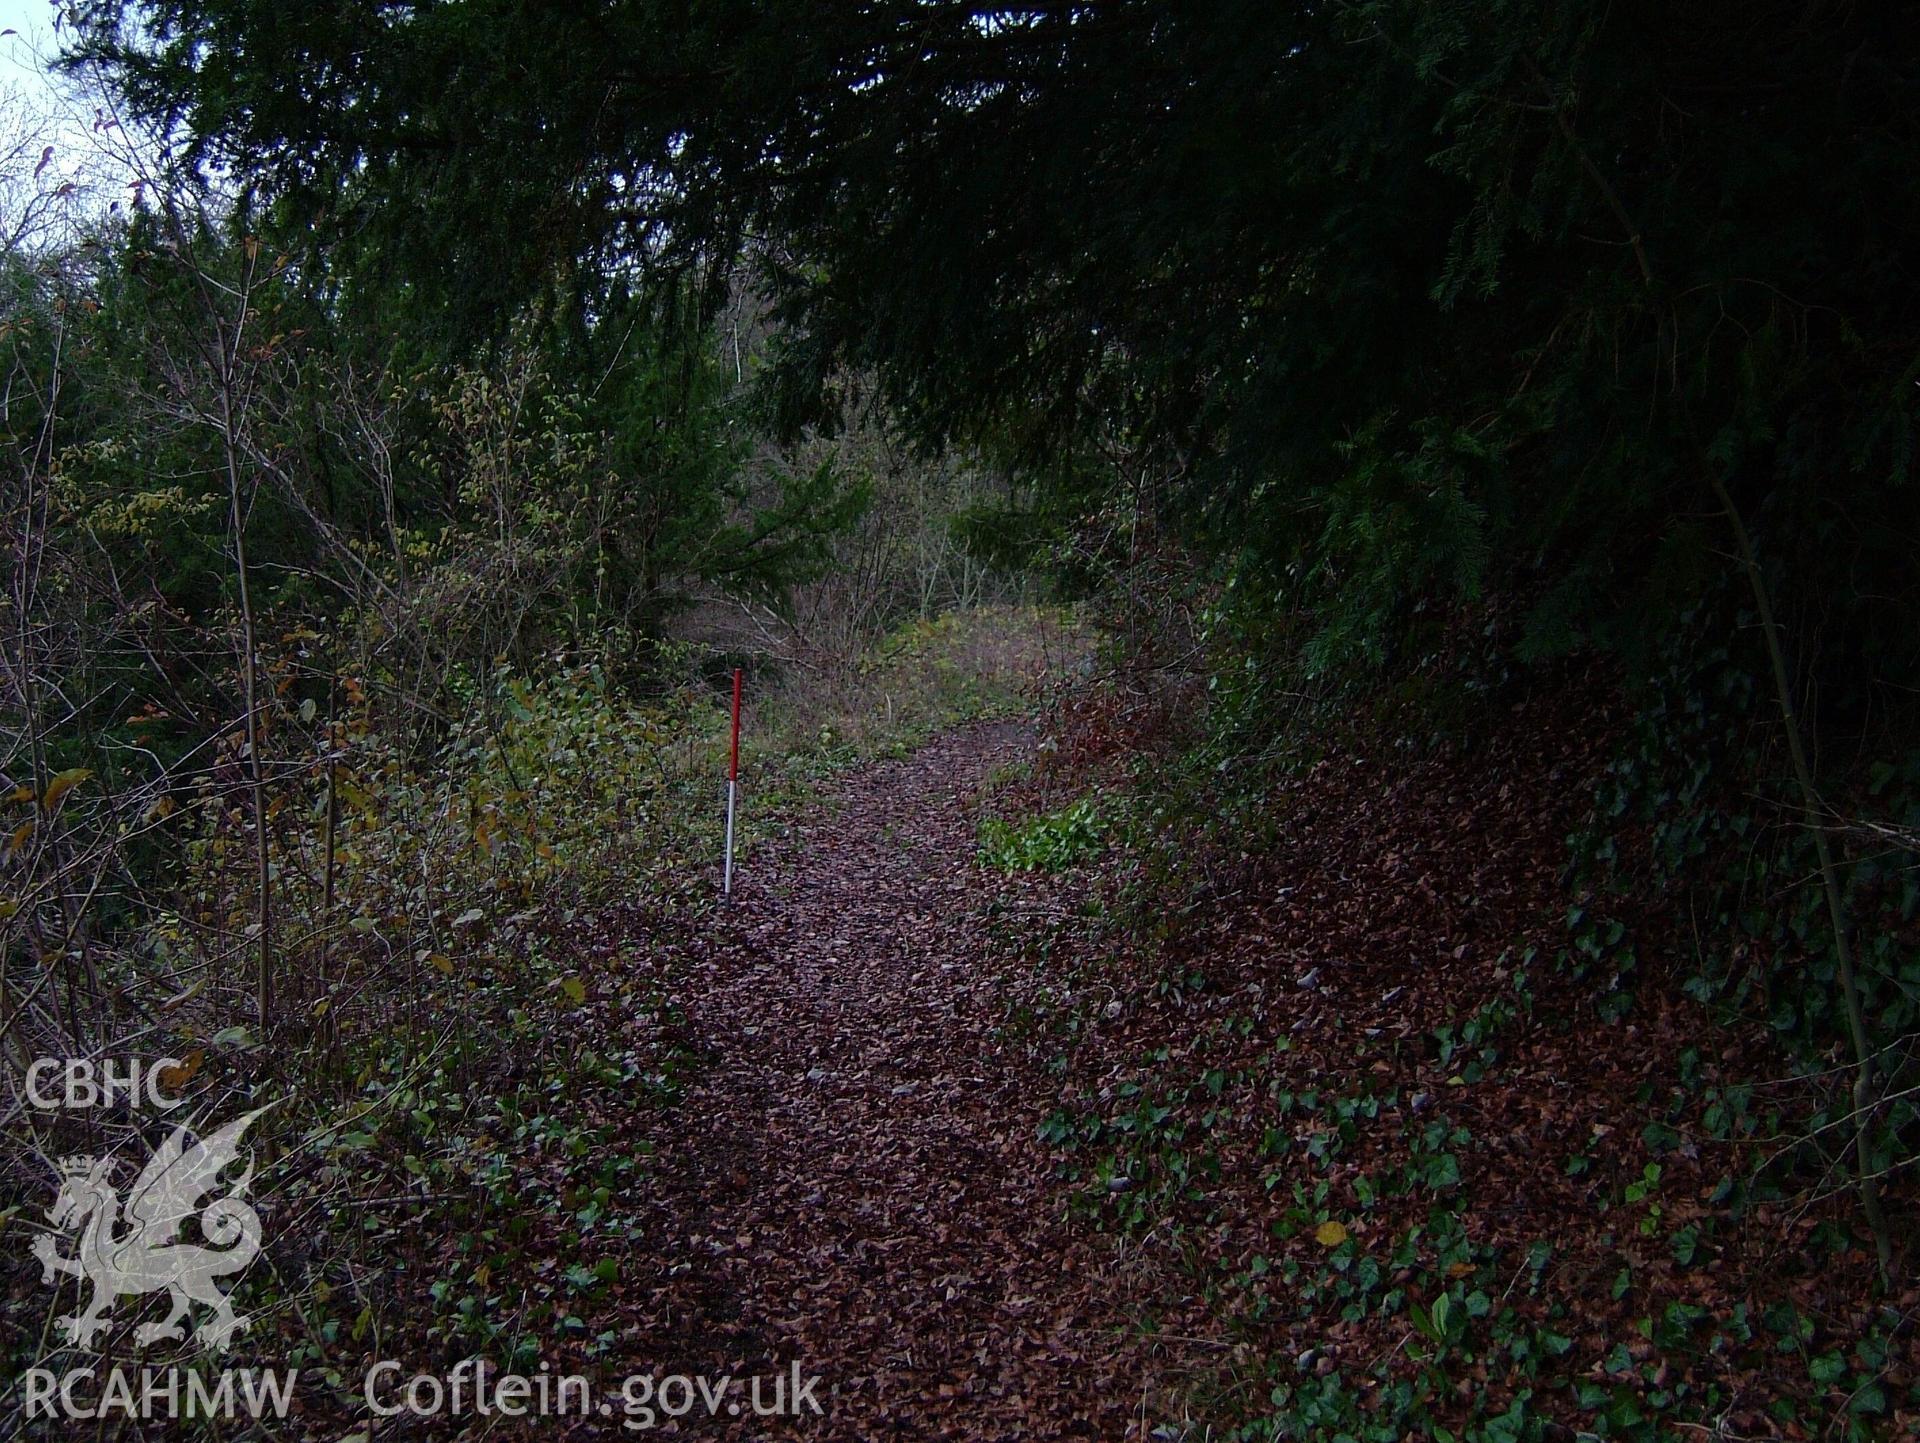 Digital colour photograph taken as part of an archaeological survey at the Piercefield walks, 2004. The photograph shows a modern footpath at the Piercefield Estate.